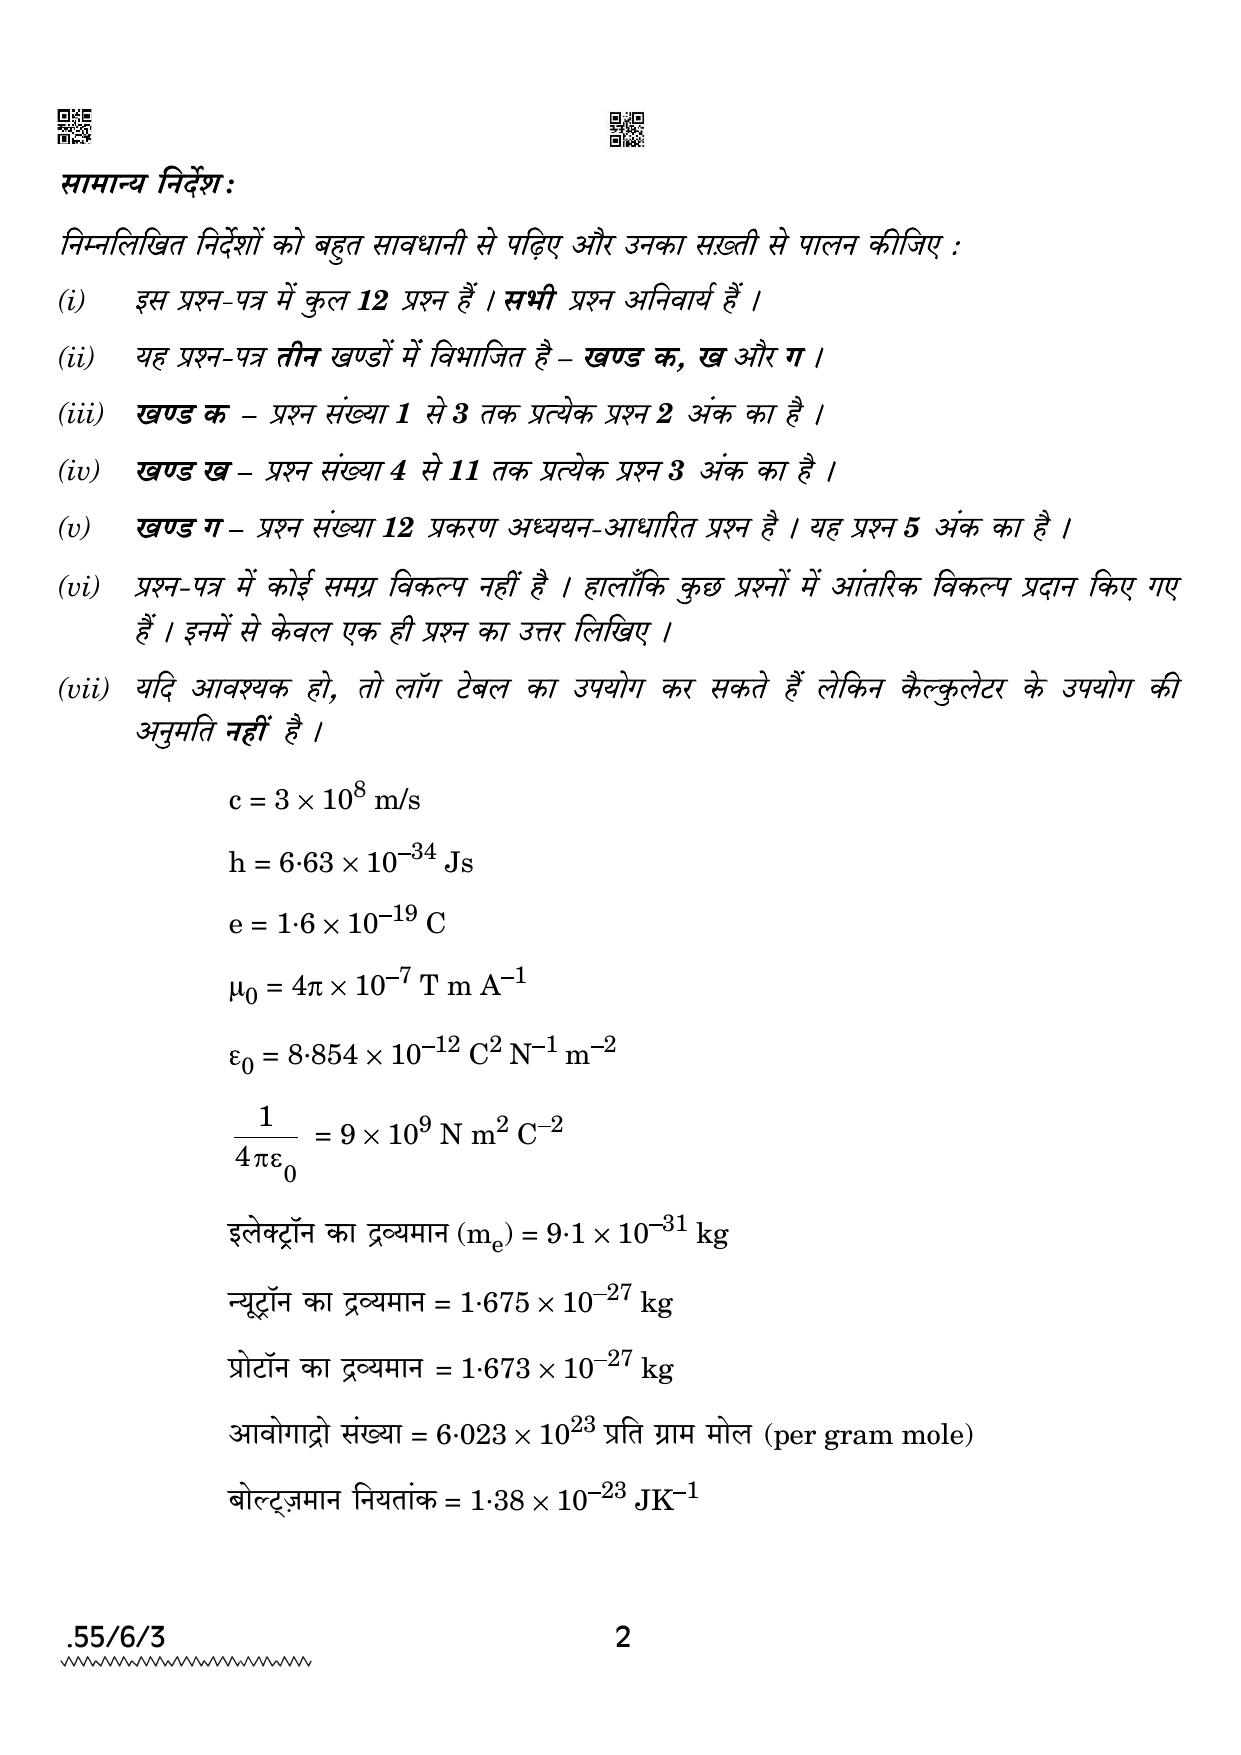 CBSE Class 12 55-6-3 PHYSICS 2022 Compartment Question Paper - Page 2